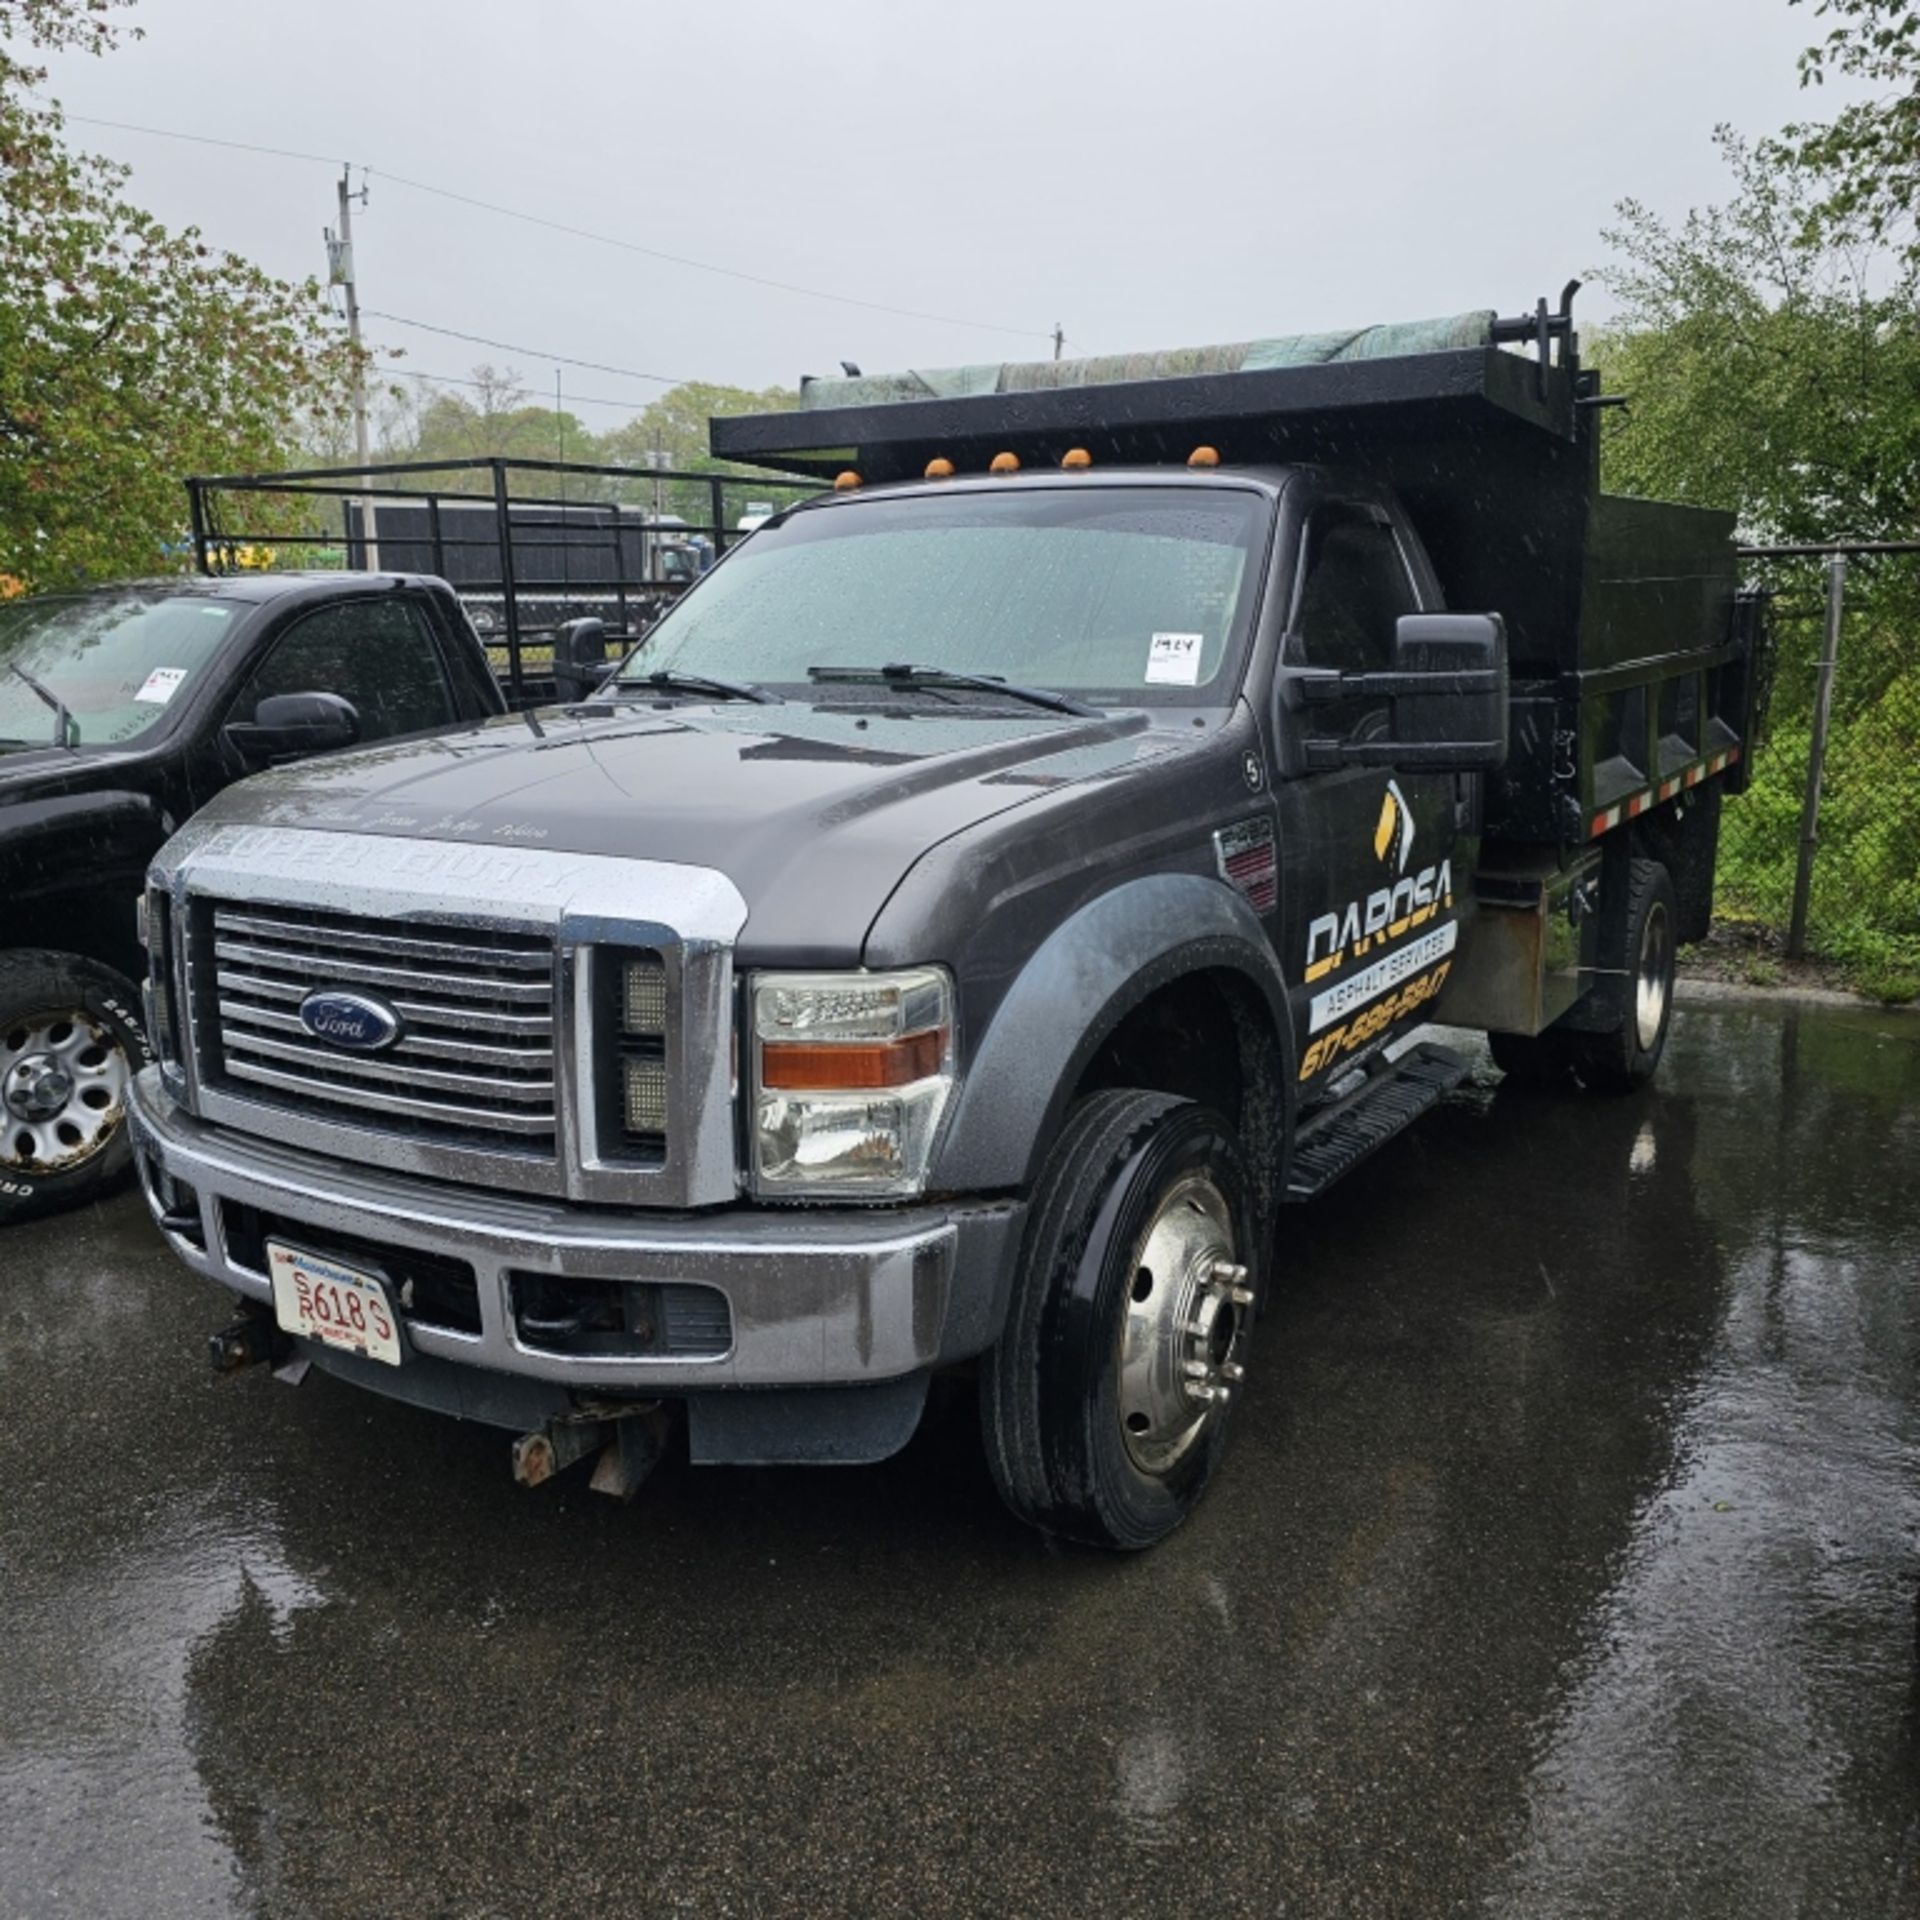 2008 Ford F450 Dump Truck - Image 2 of 10